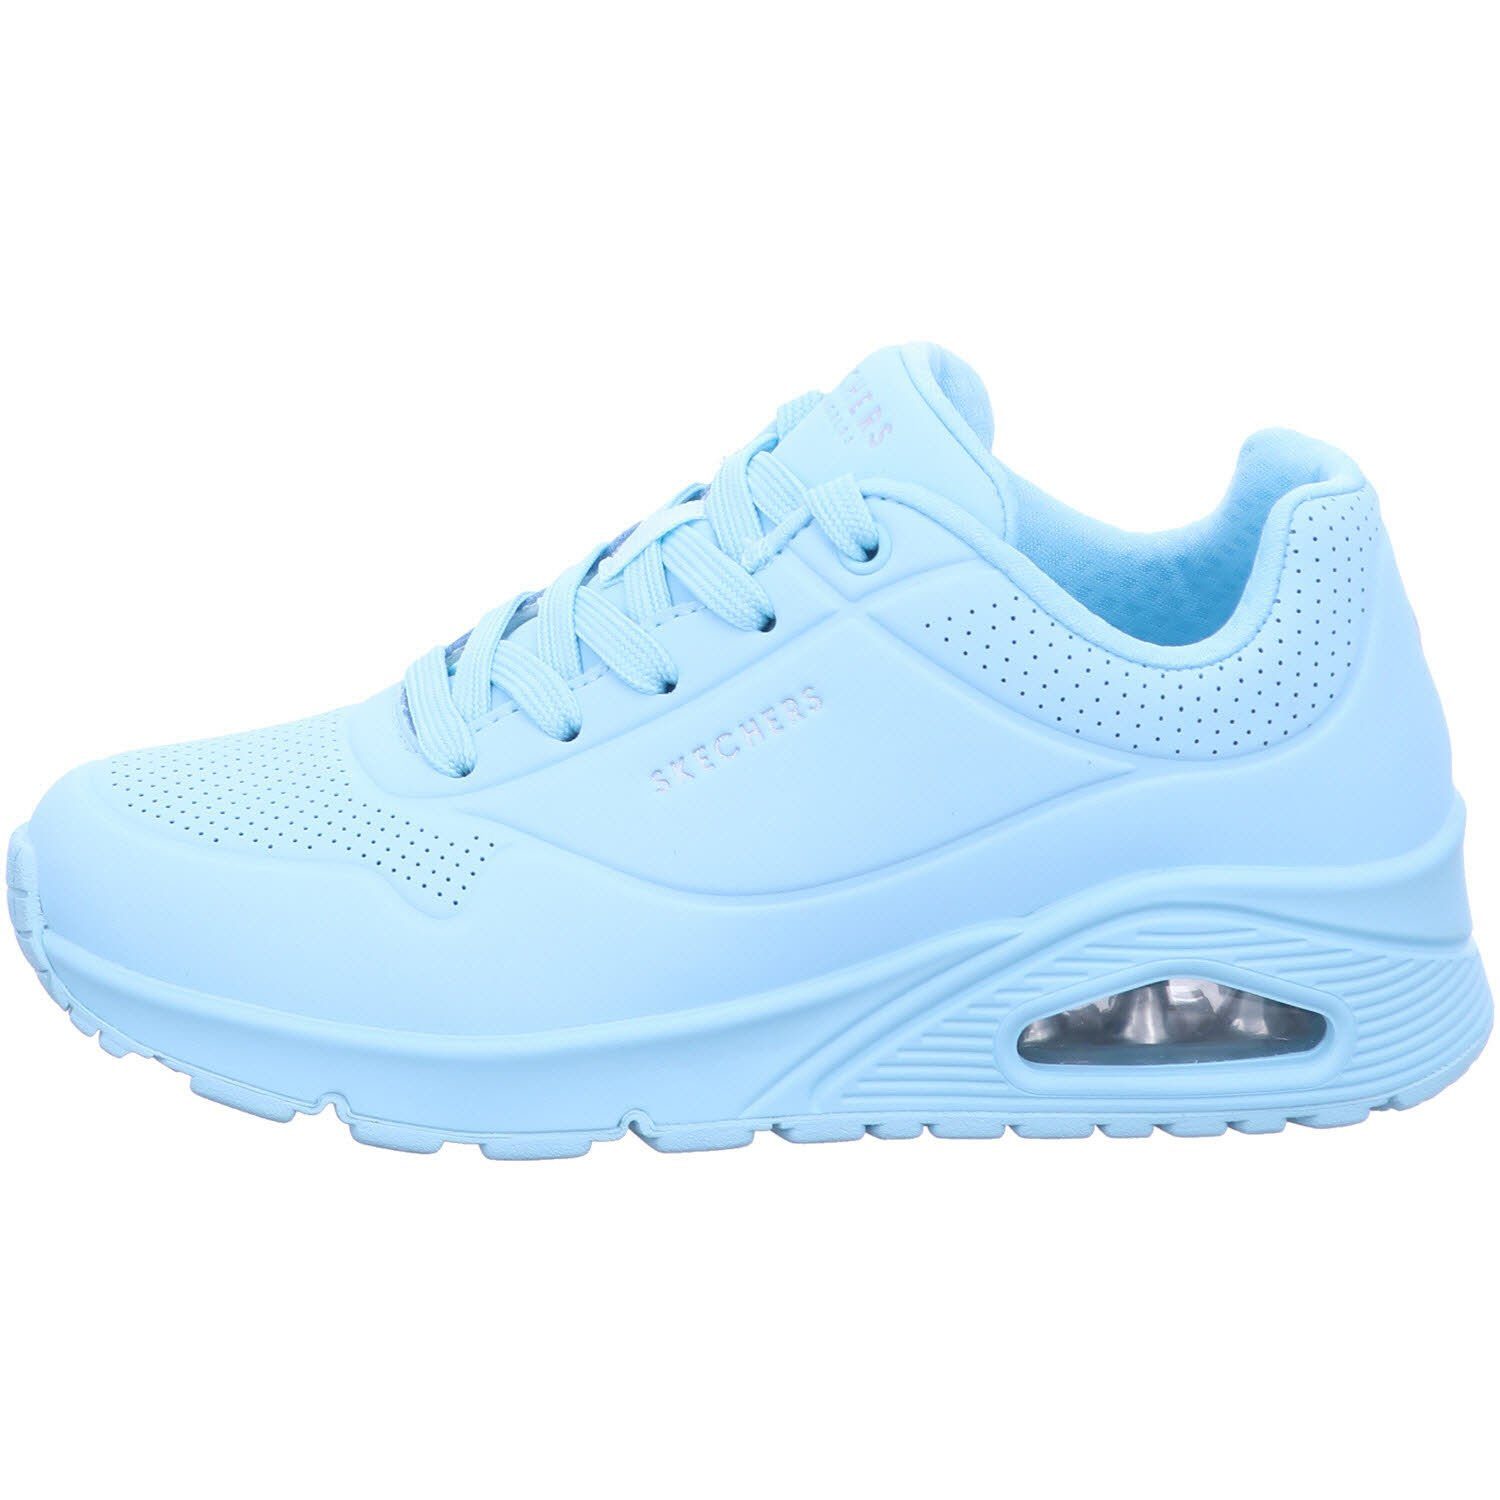 UNO Skechers Sneaker (2-tlg) STAND blue ON - light AIR